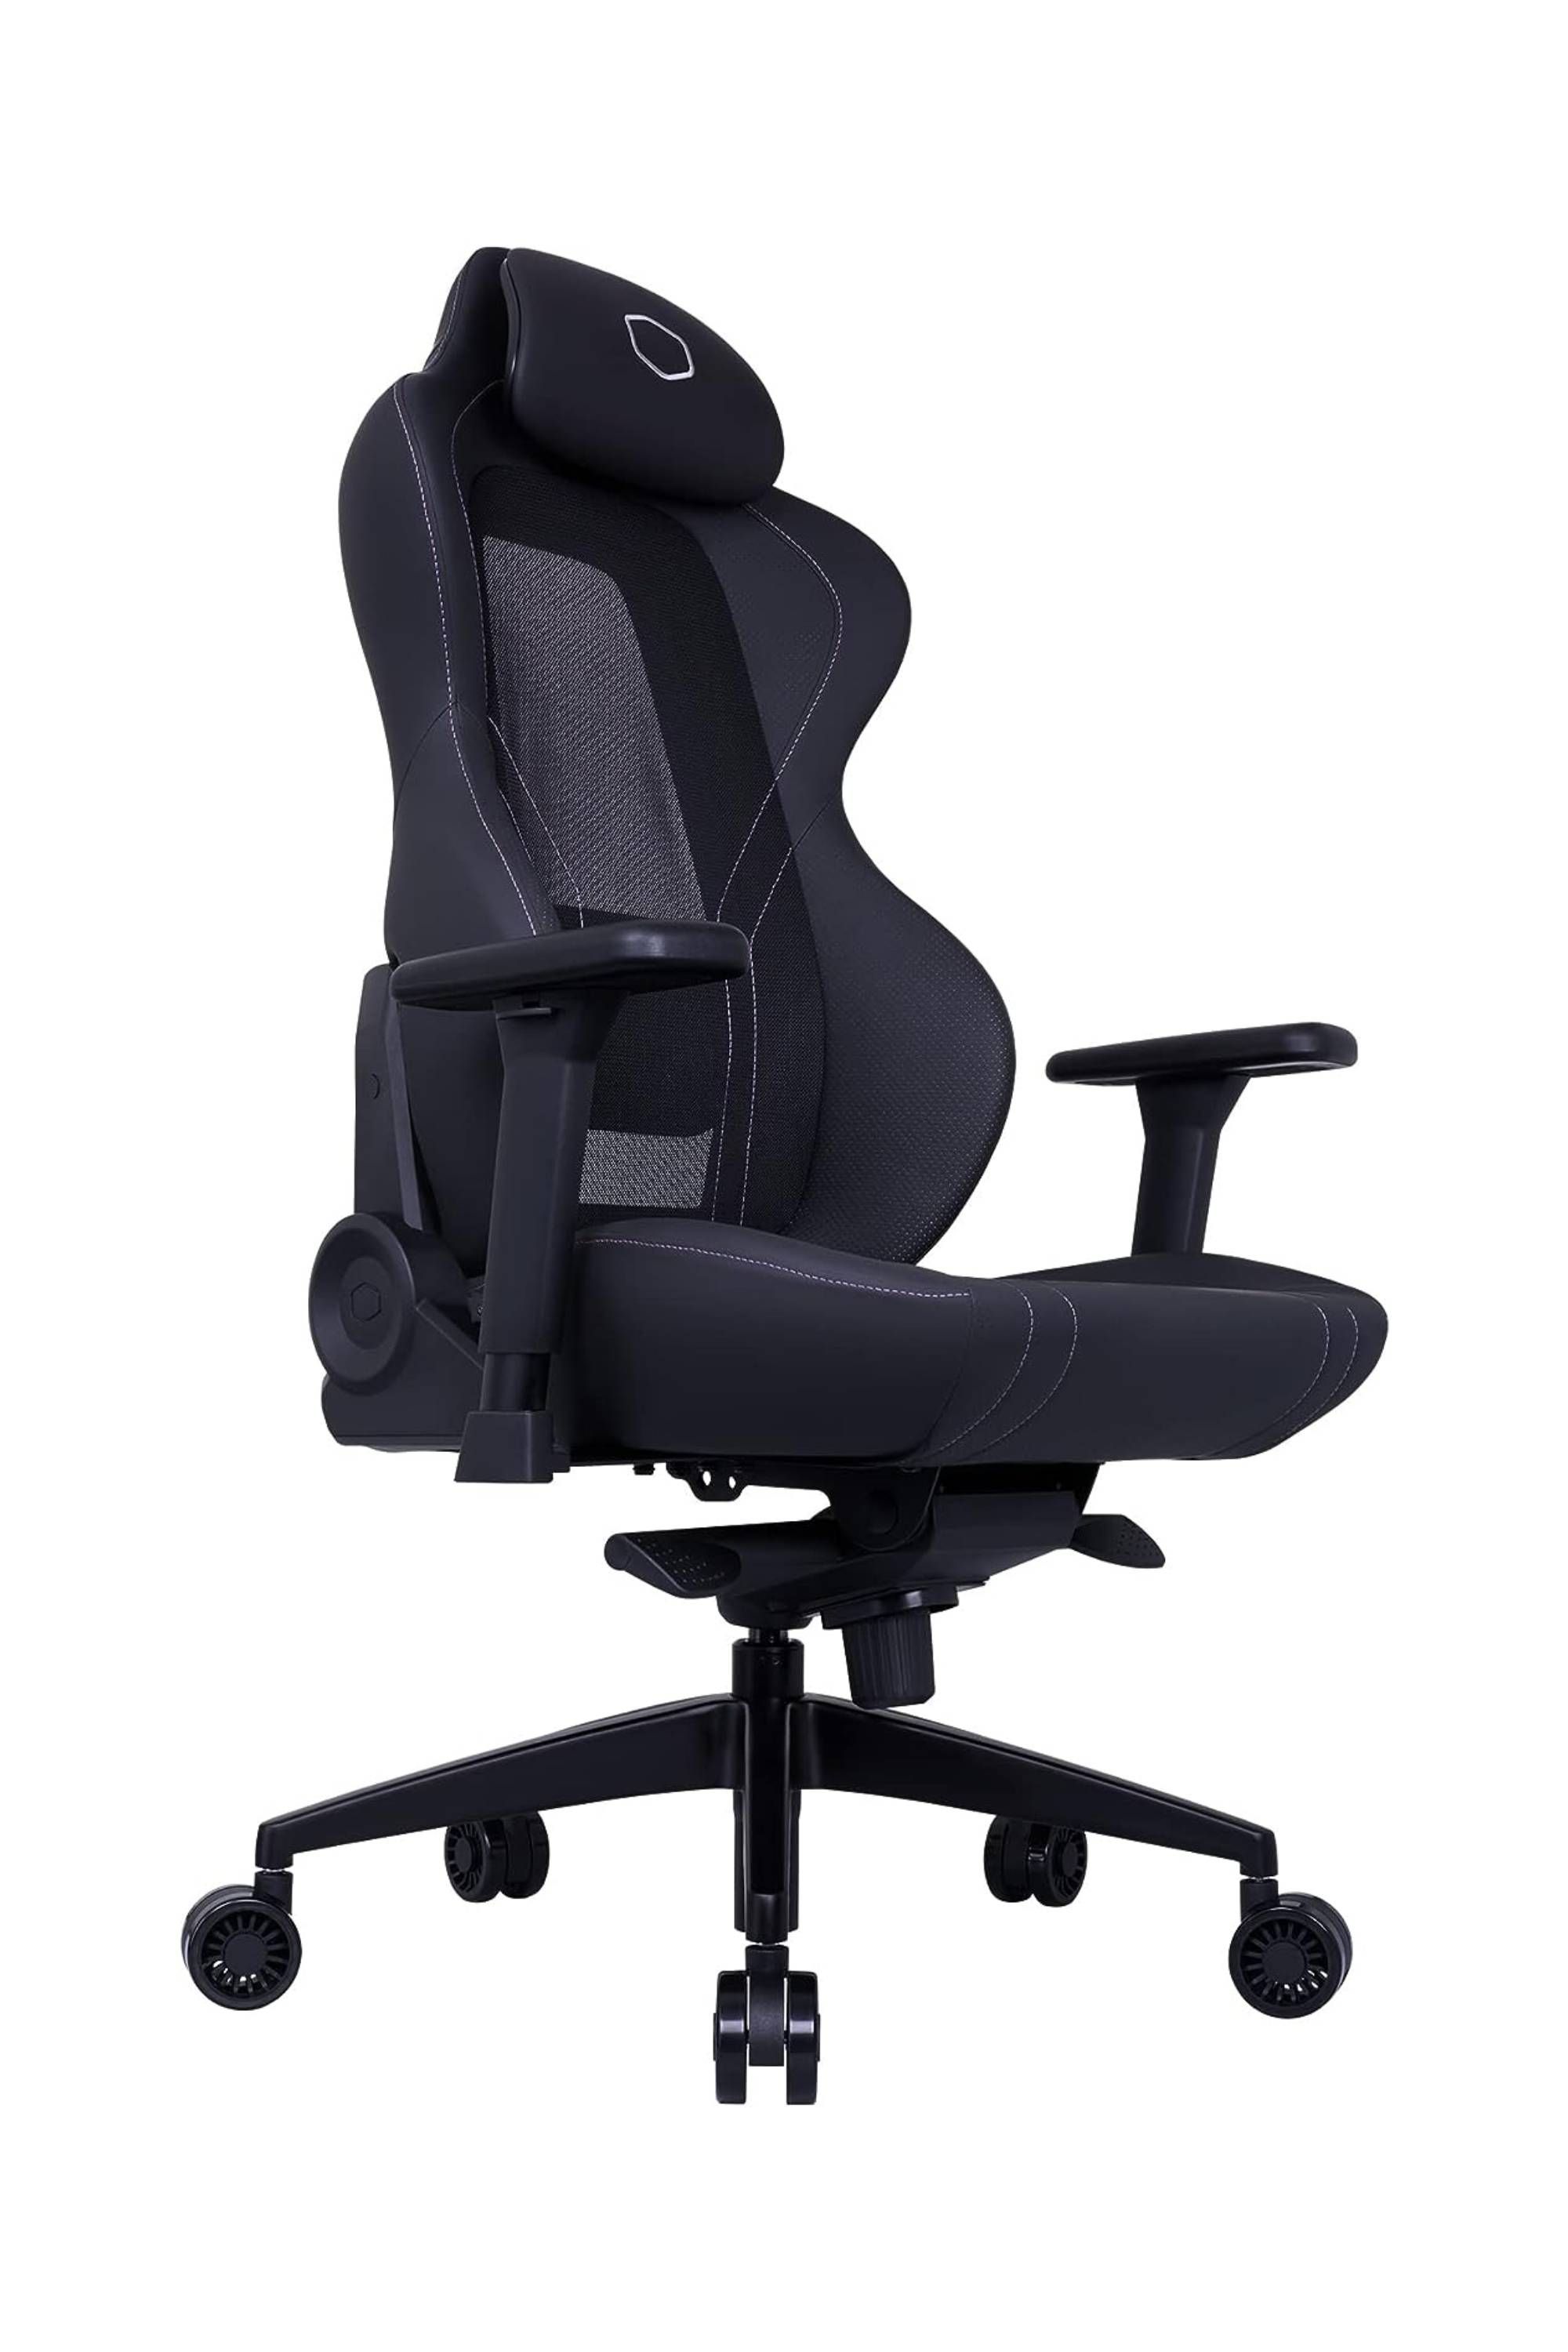 Coolest gaming chairs to play in comfort and style » Gadget Flow